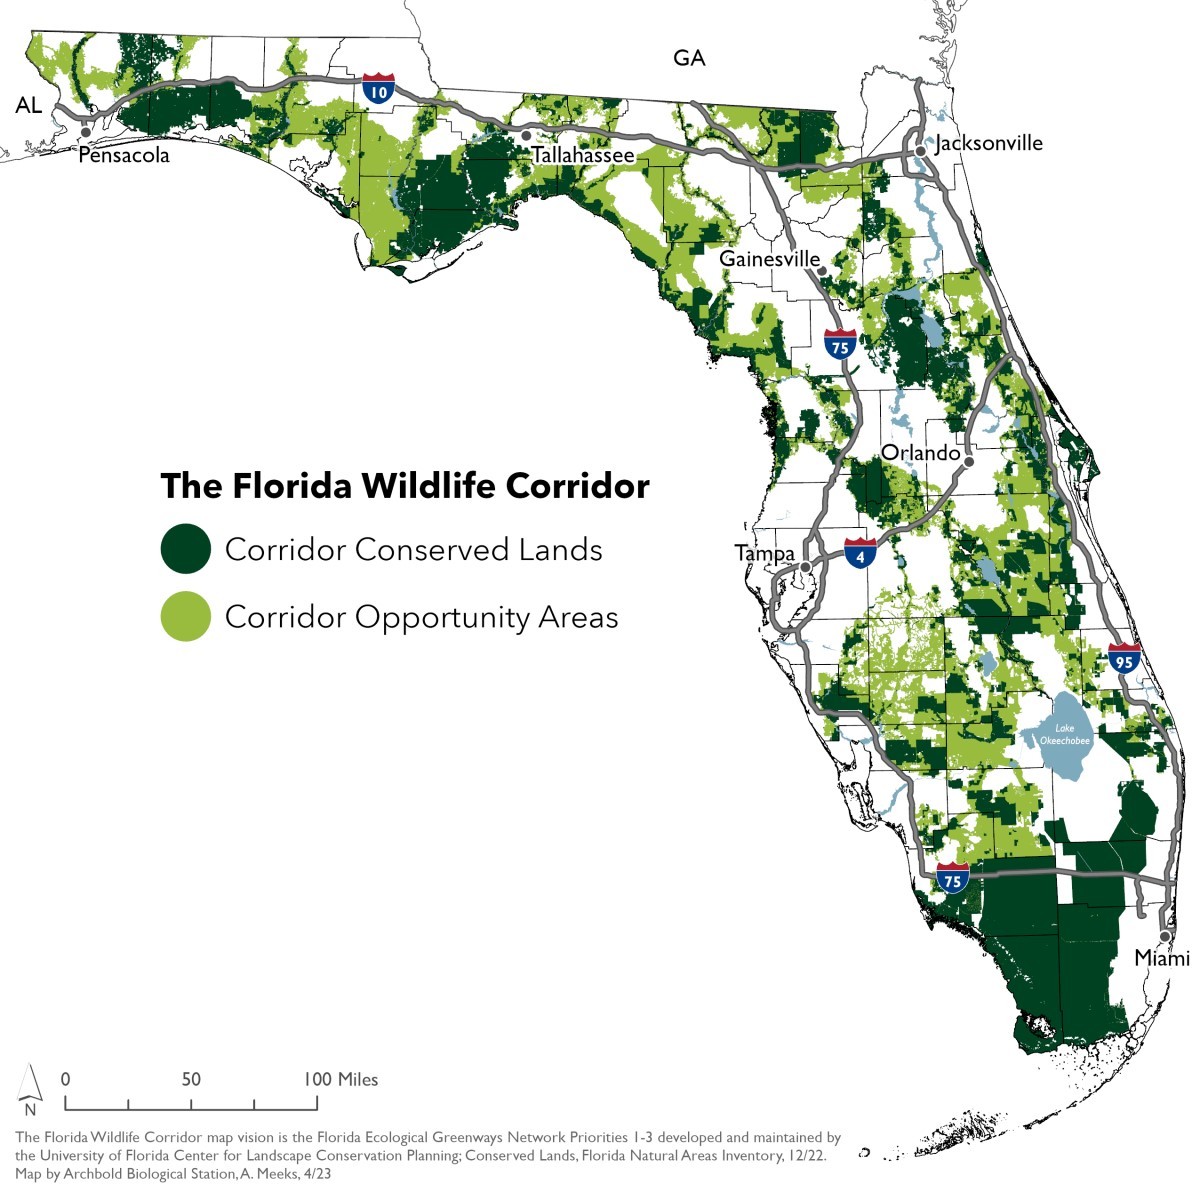 The Florida Wildlife Corridor opportunity areas and conserved lands.